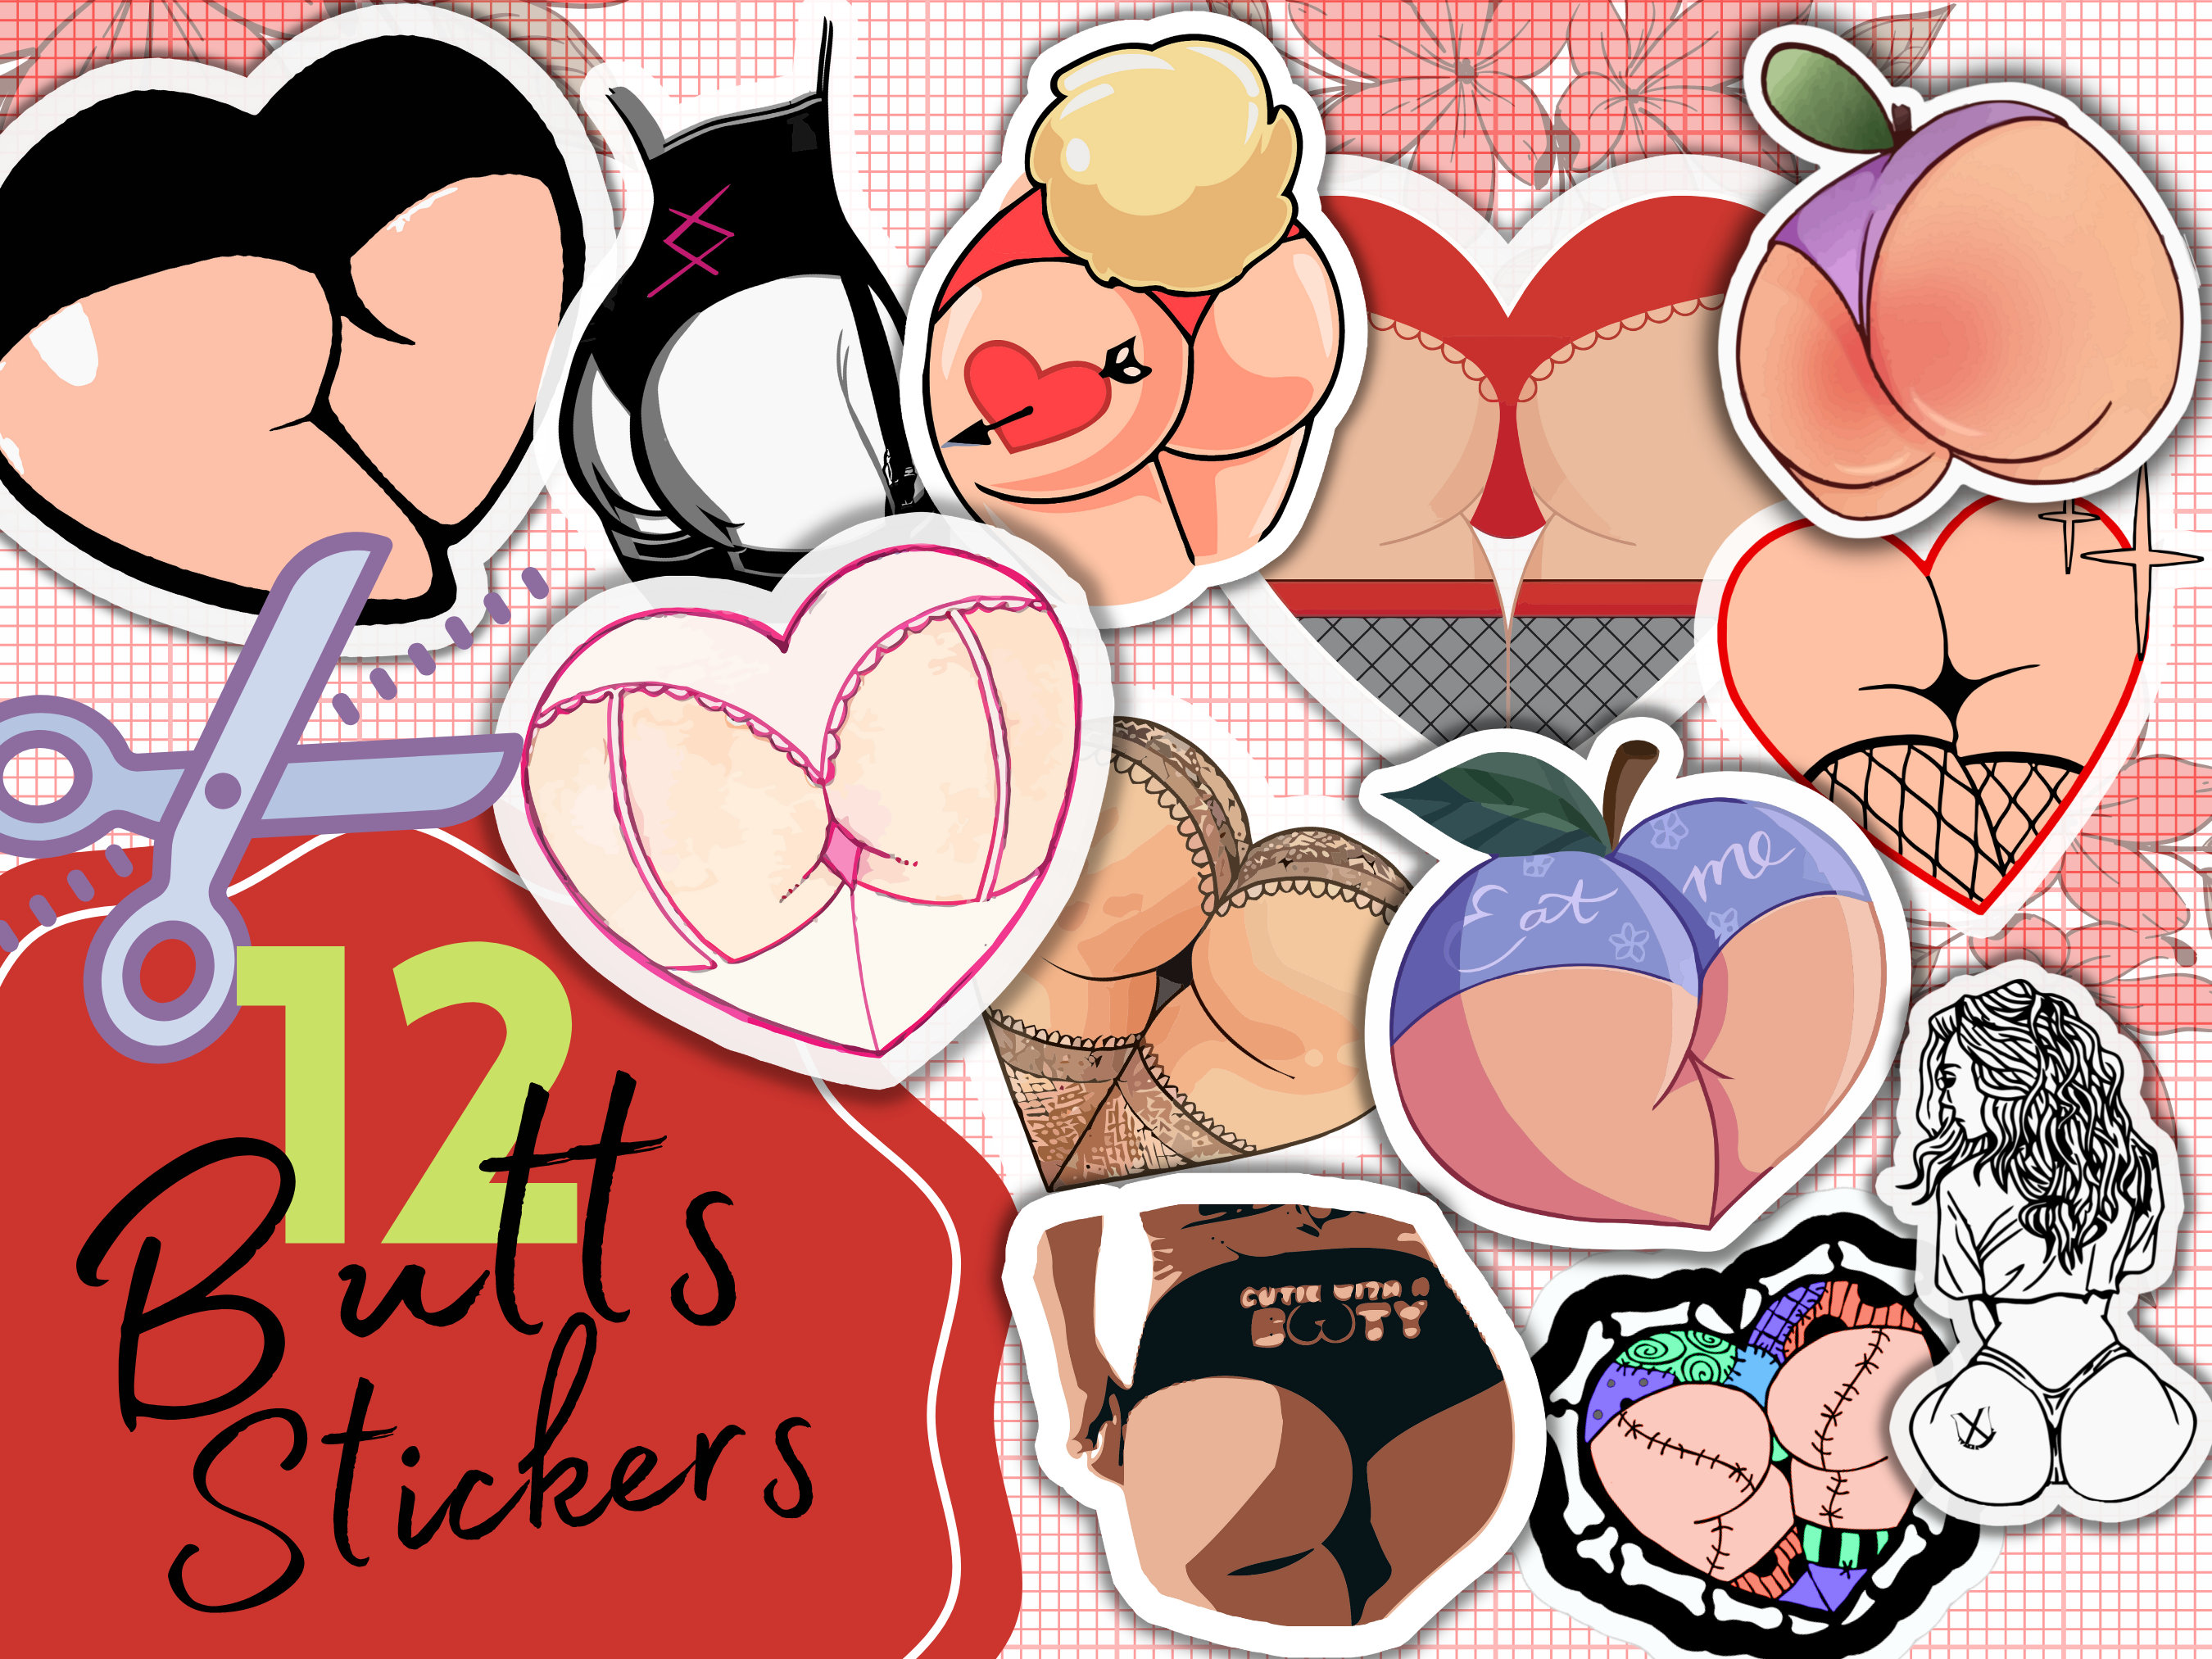 ching ly recommends one free booty pic sticker pic